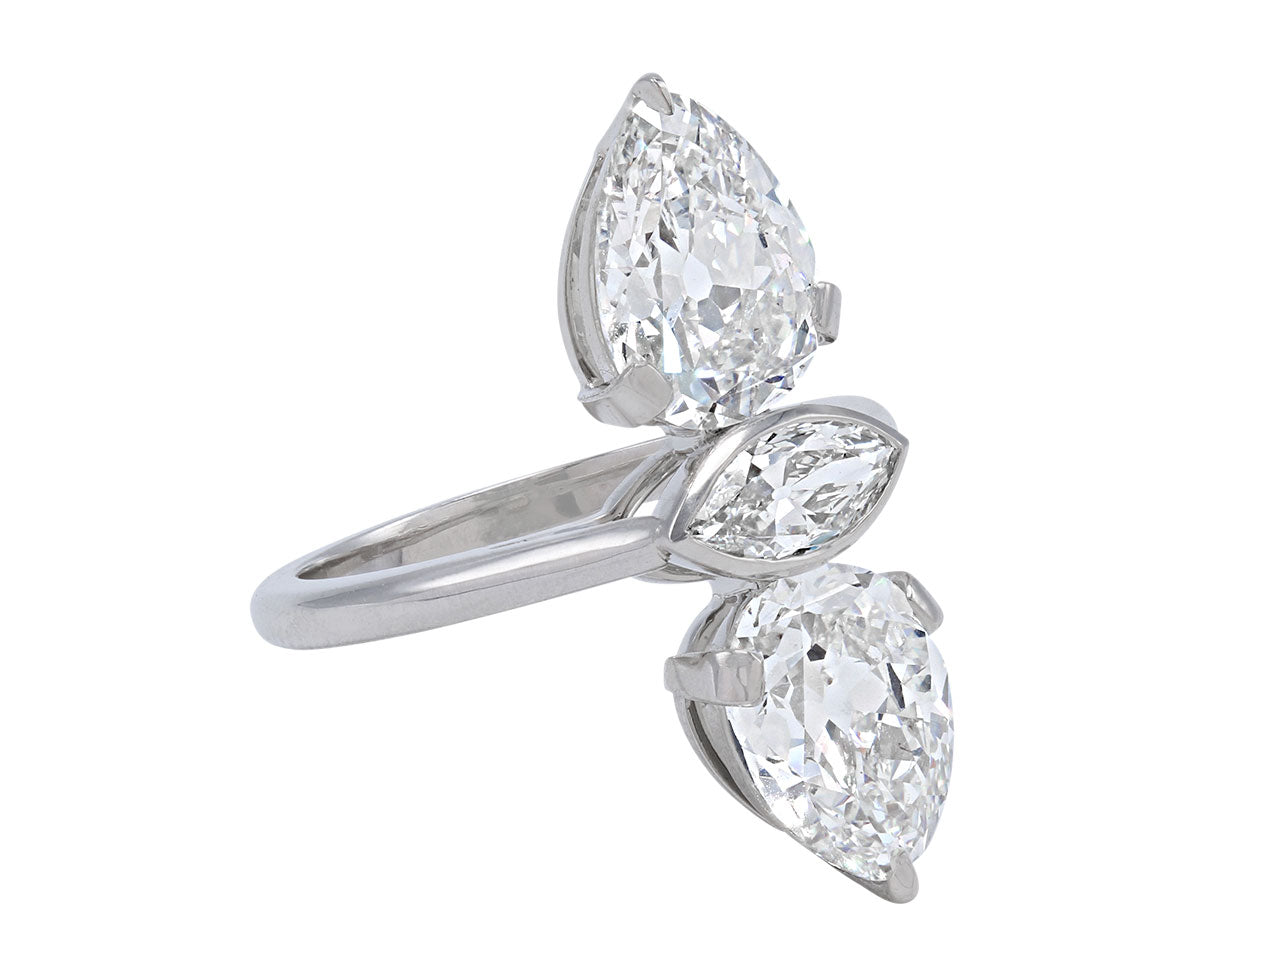 Beladora 'Bespoke' Twin Old-cut Pear and Marquise Diamond Ring in Platinum